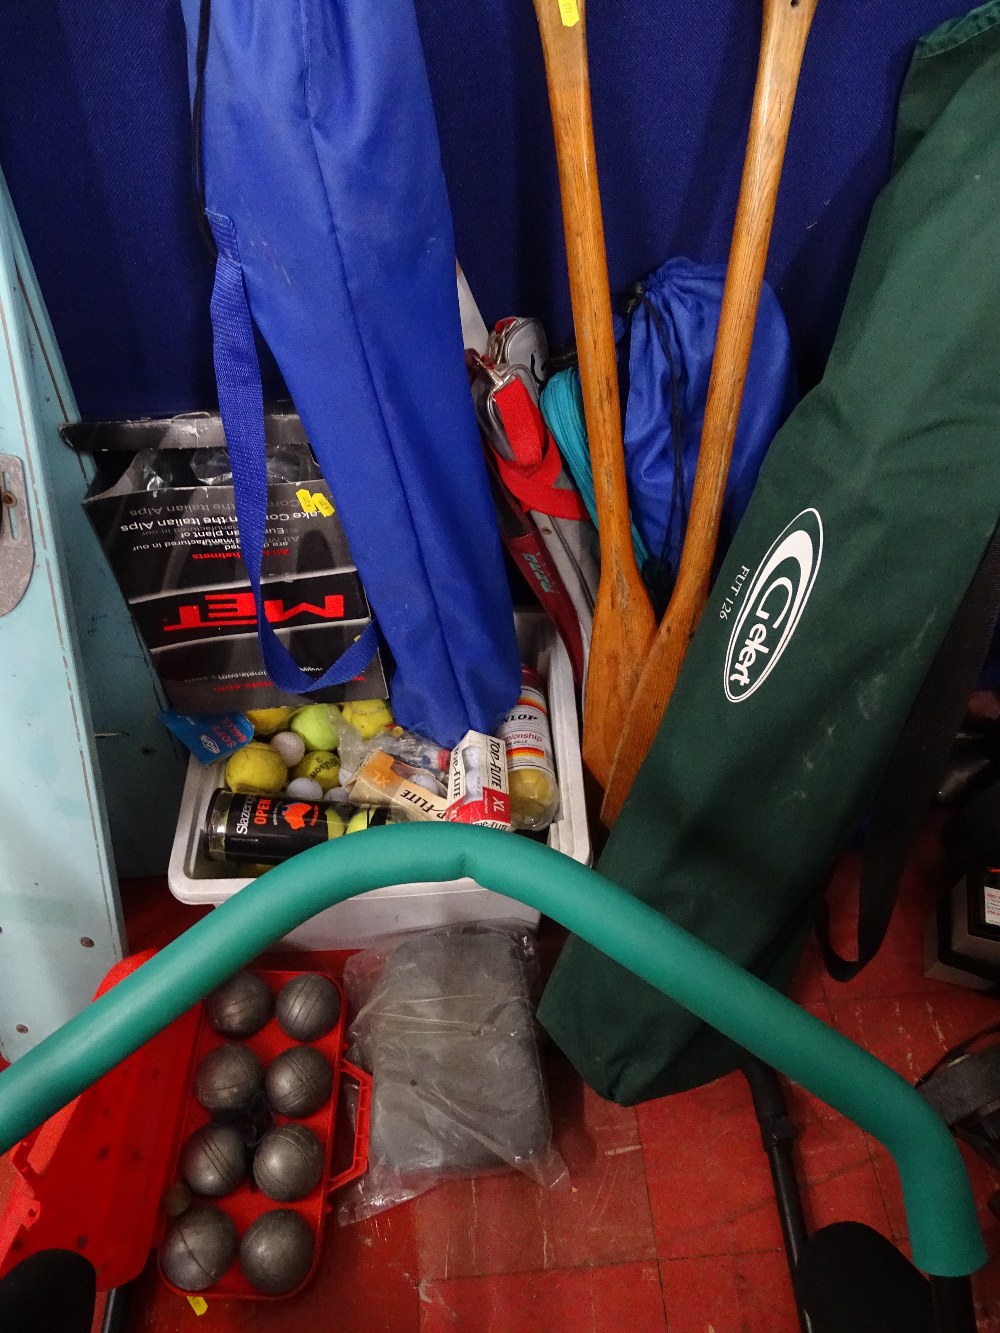 Plastic crate of various tennis balls, golf balls etc and wooden oars, folding camping chairs in